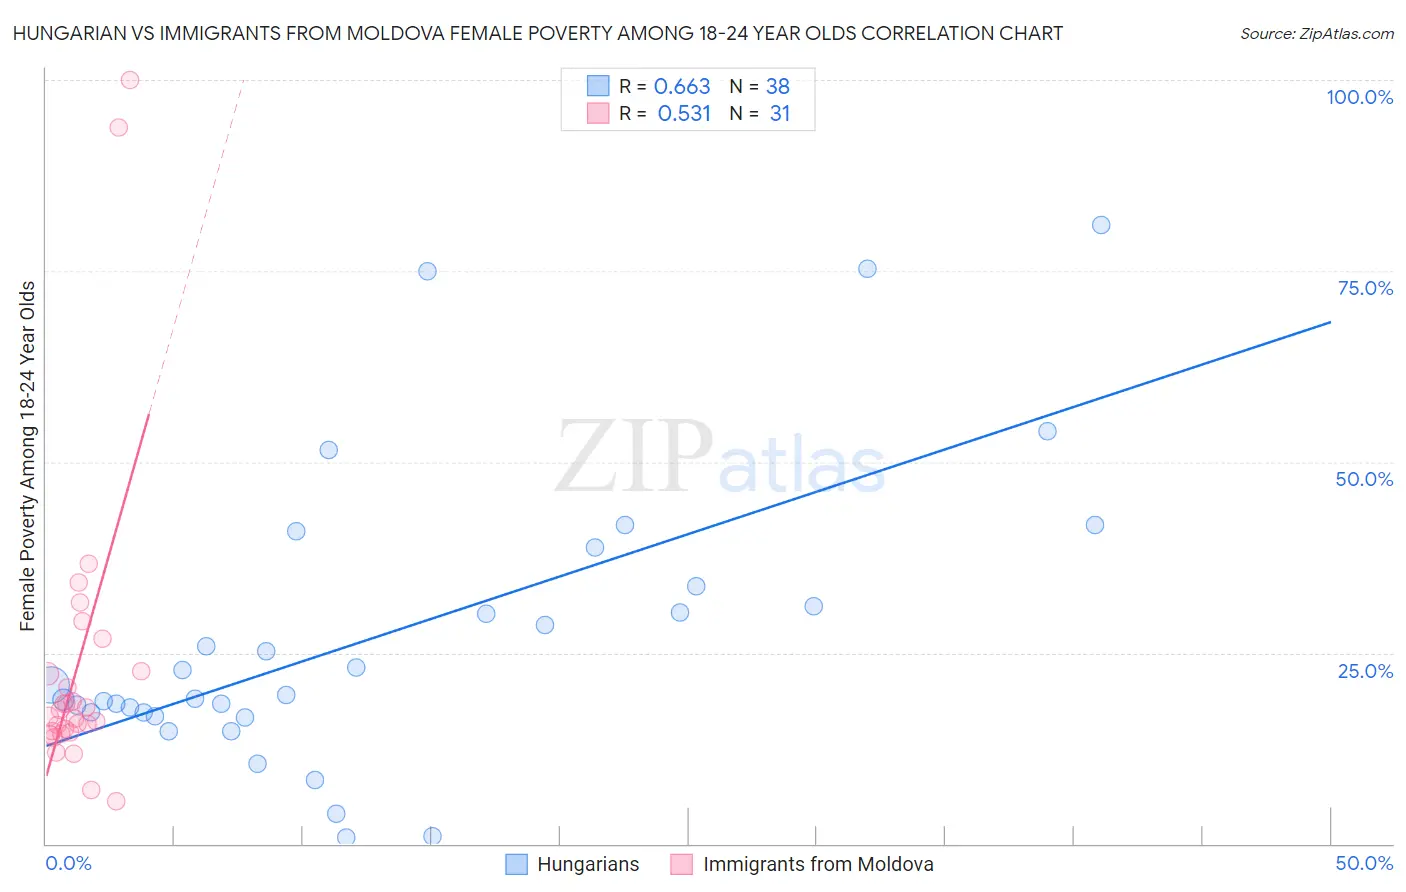 Hungarian vs Immigrants from Moldova Female Poverty Among 18-24 Year Olds